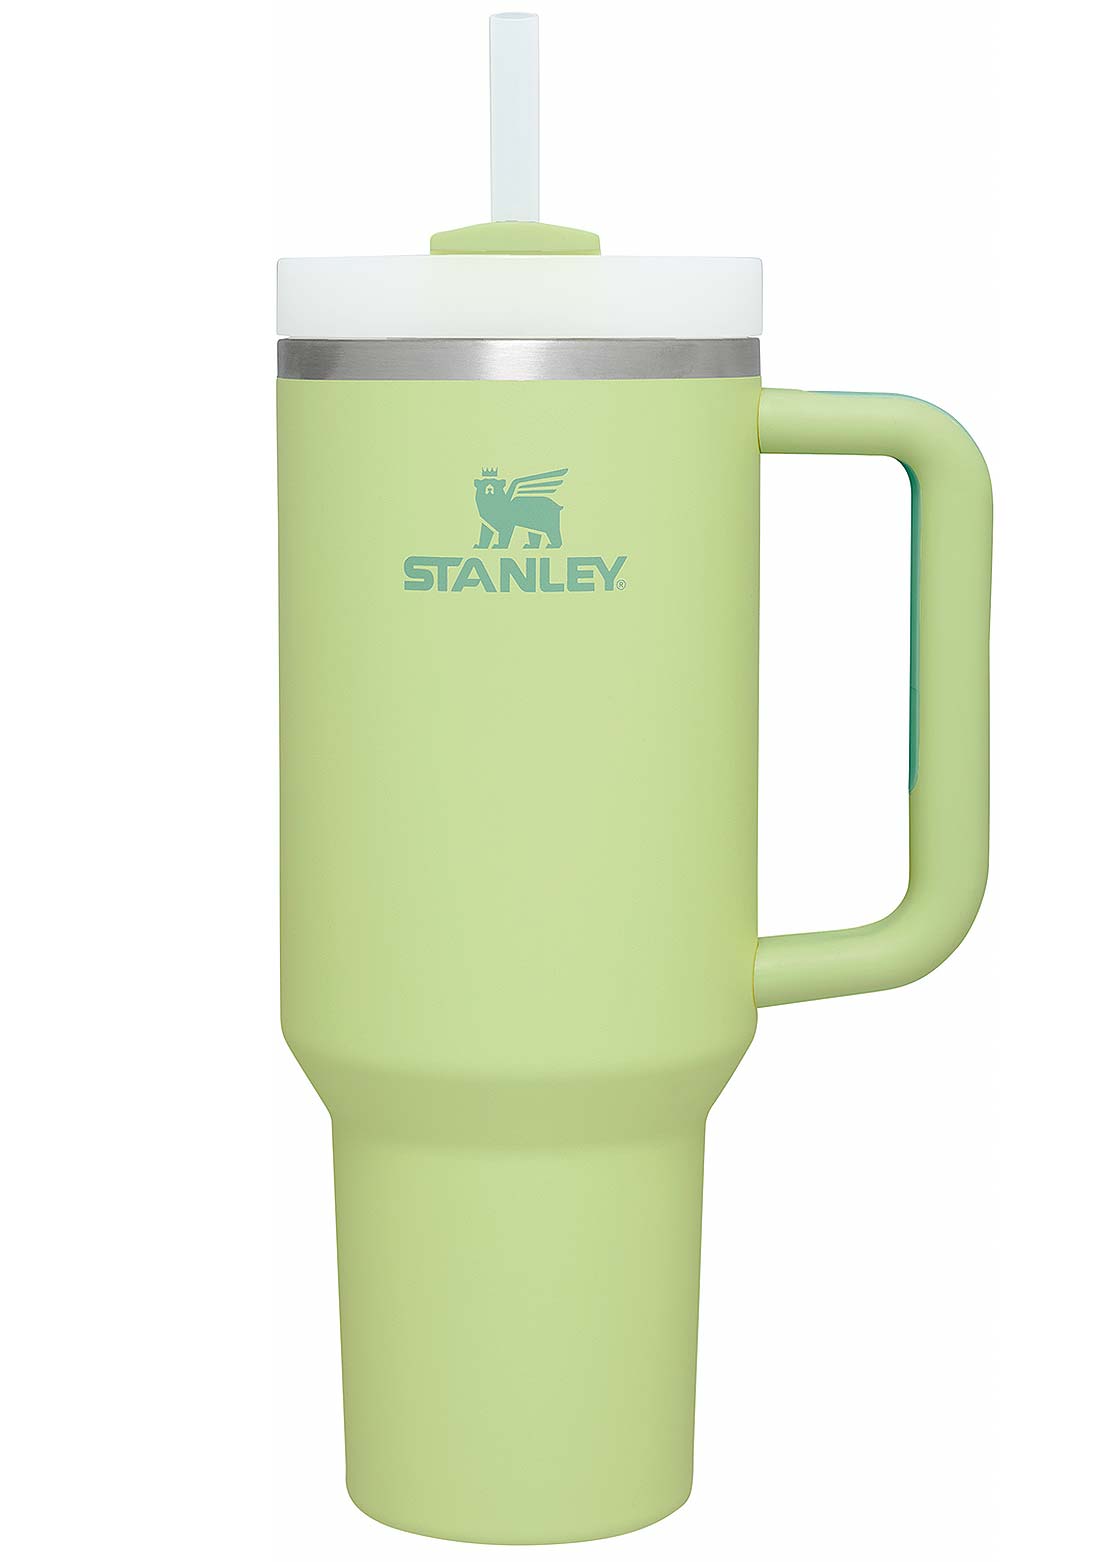 https://cdn.shopify.com/s/files/1/0155/0629/files/stanley-the-quencher-h2-o-flowstate-tumbler-423-citron-front.jpg?v=1695064040